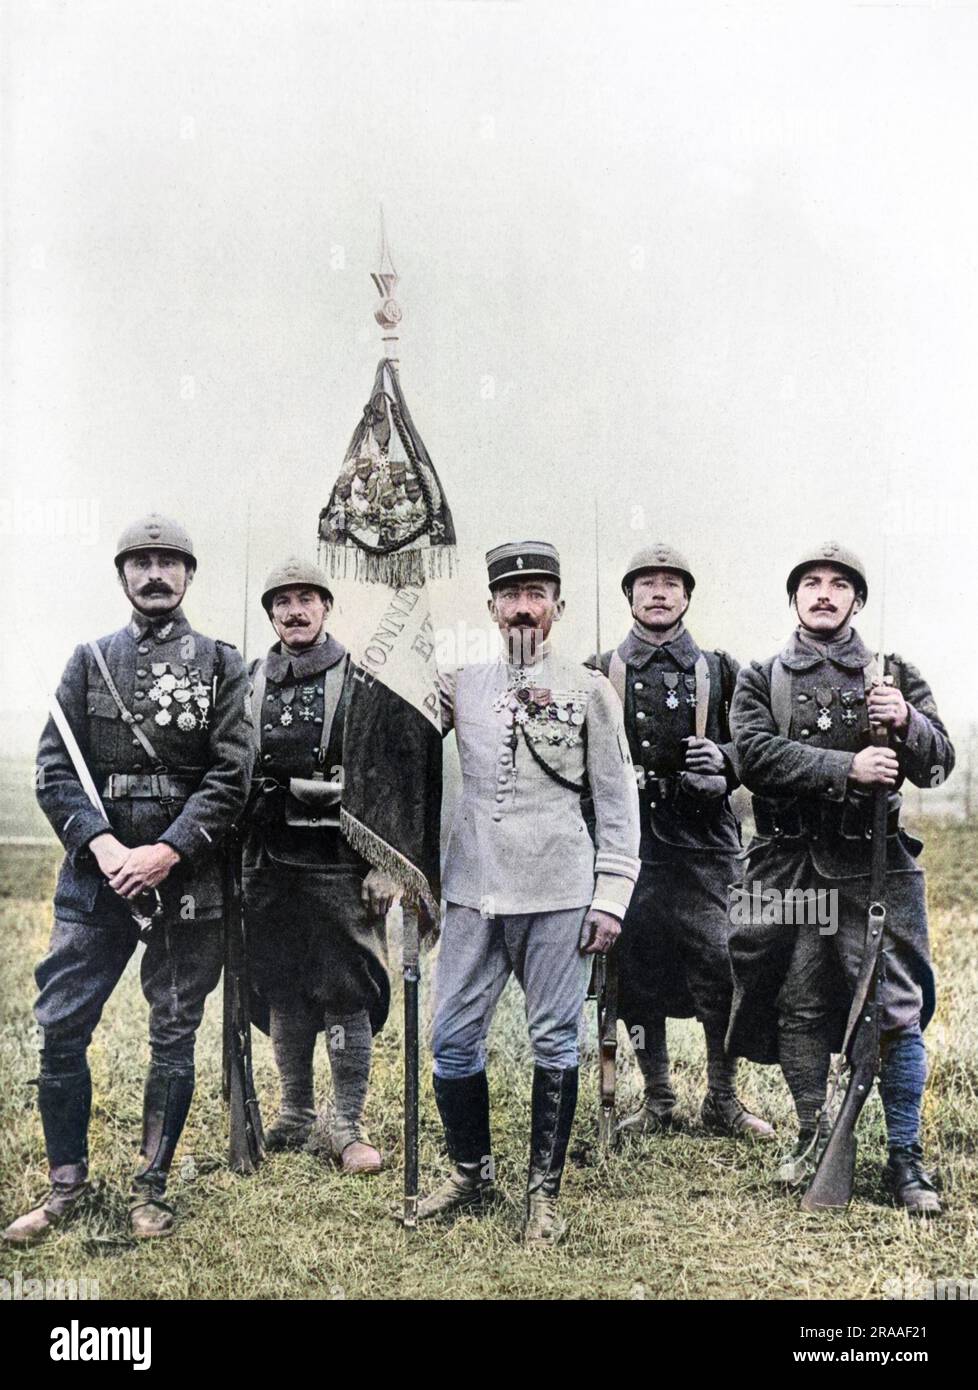 Lieutenant-Colonel Paul-Frederic Rollet (1875-1941), General in the French Foreign Legion, Regiment de Marche.  Seen here during the First World War, probably at Verdun, northern France, with four others, where the RMLE (Regiment de Marche de la Legion Etrangere) won the legion d'honneur for its regimental flag.  Rollet was a legendary figure, known as Le Pere Legion.     Date: circa 1917 Stock Photo